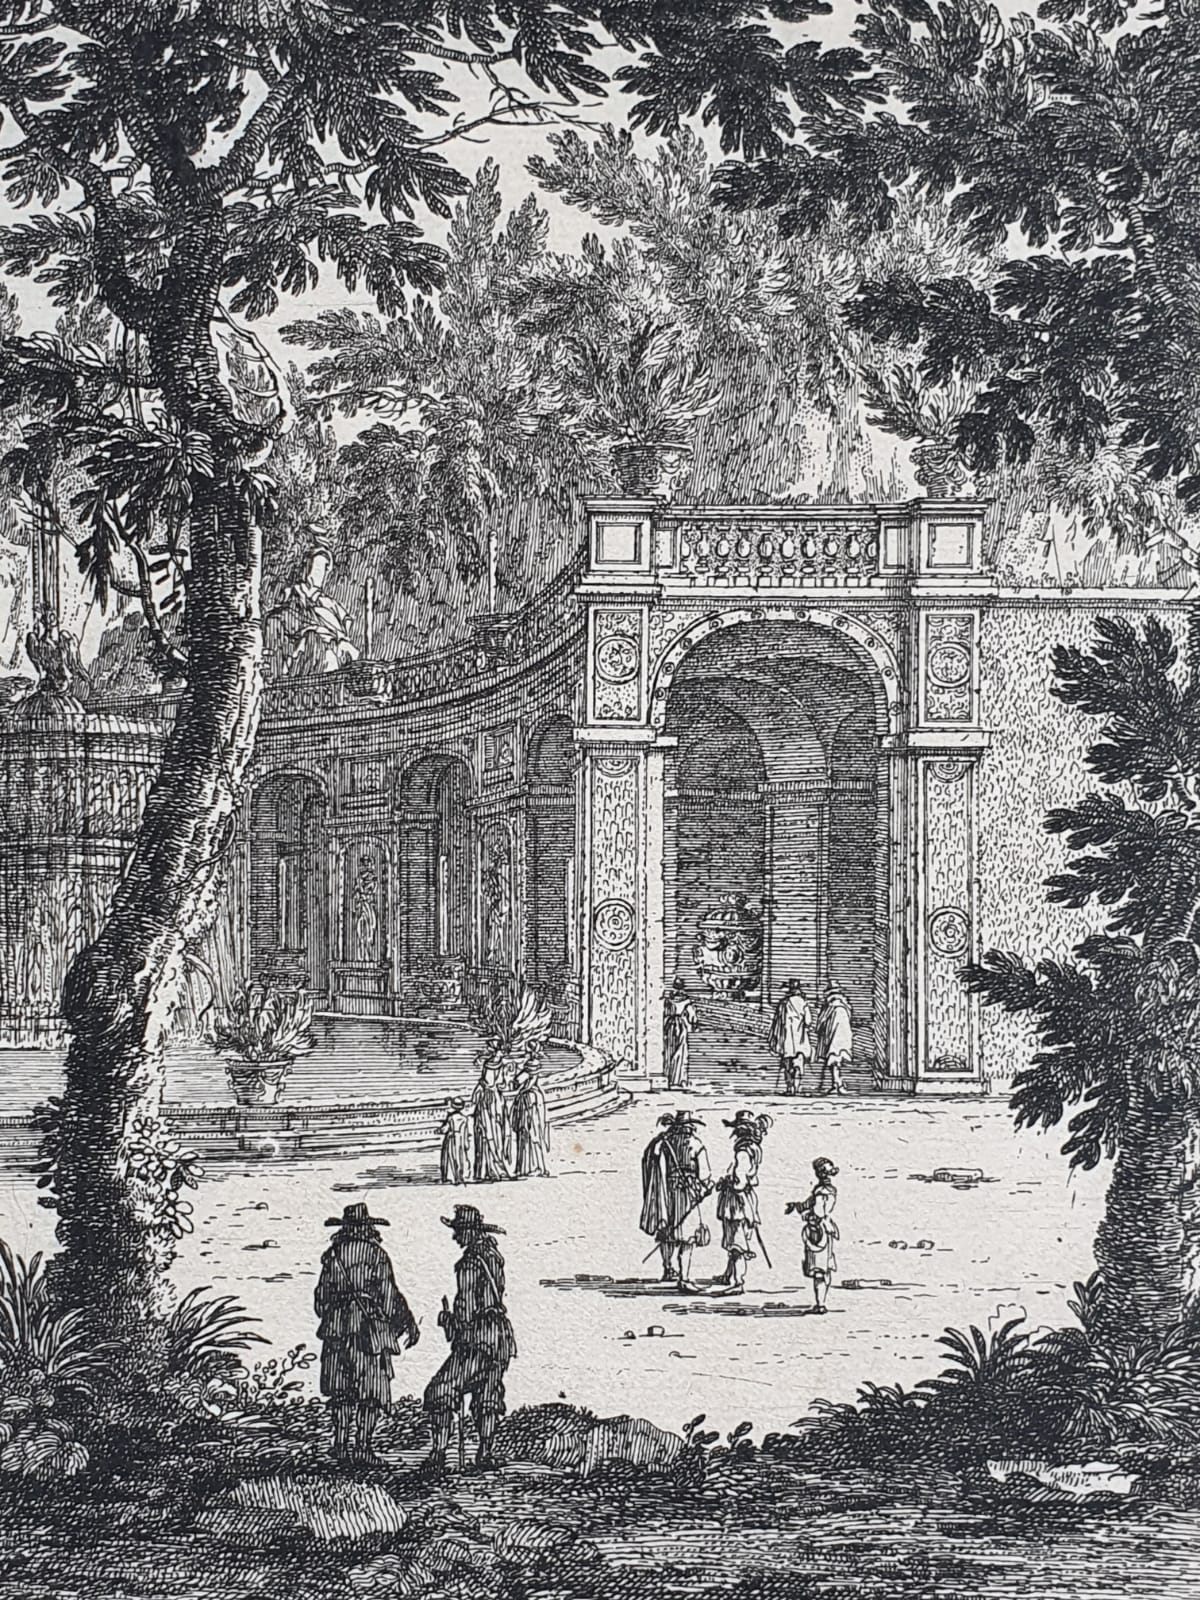 [Antique etching, ets] Perelle, View on the fountain in Tivoli (Tivoli fontein in Italië), published before 1700.